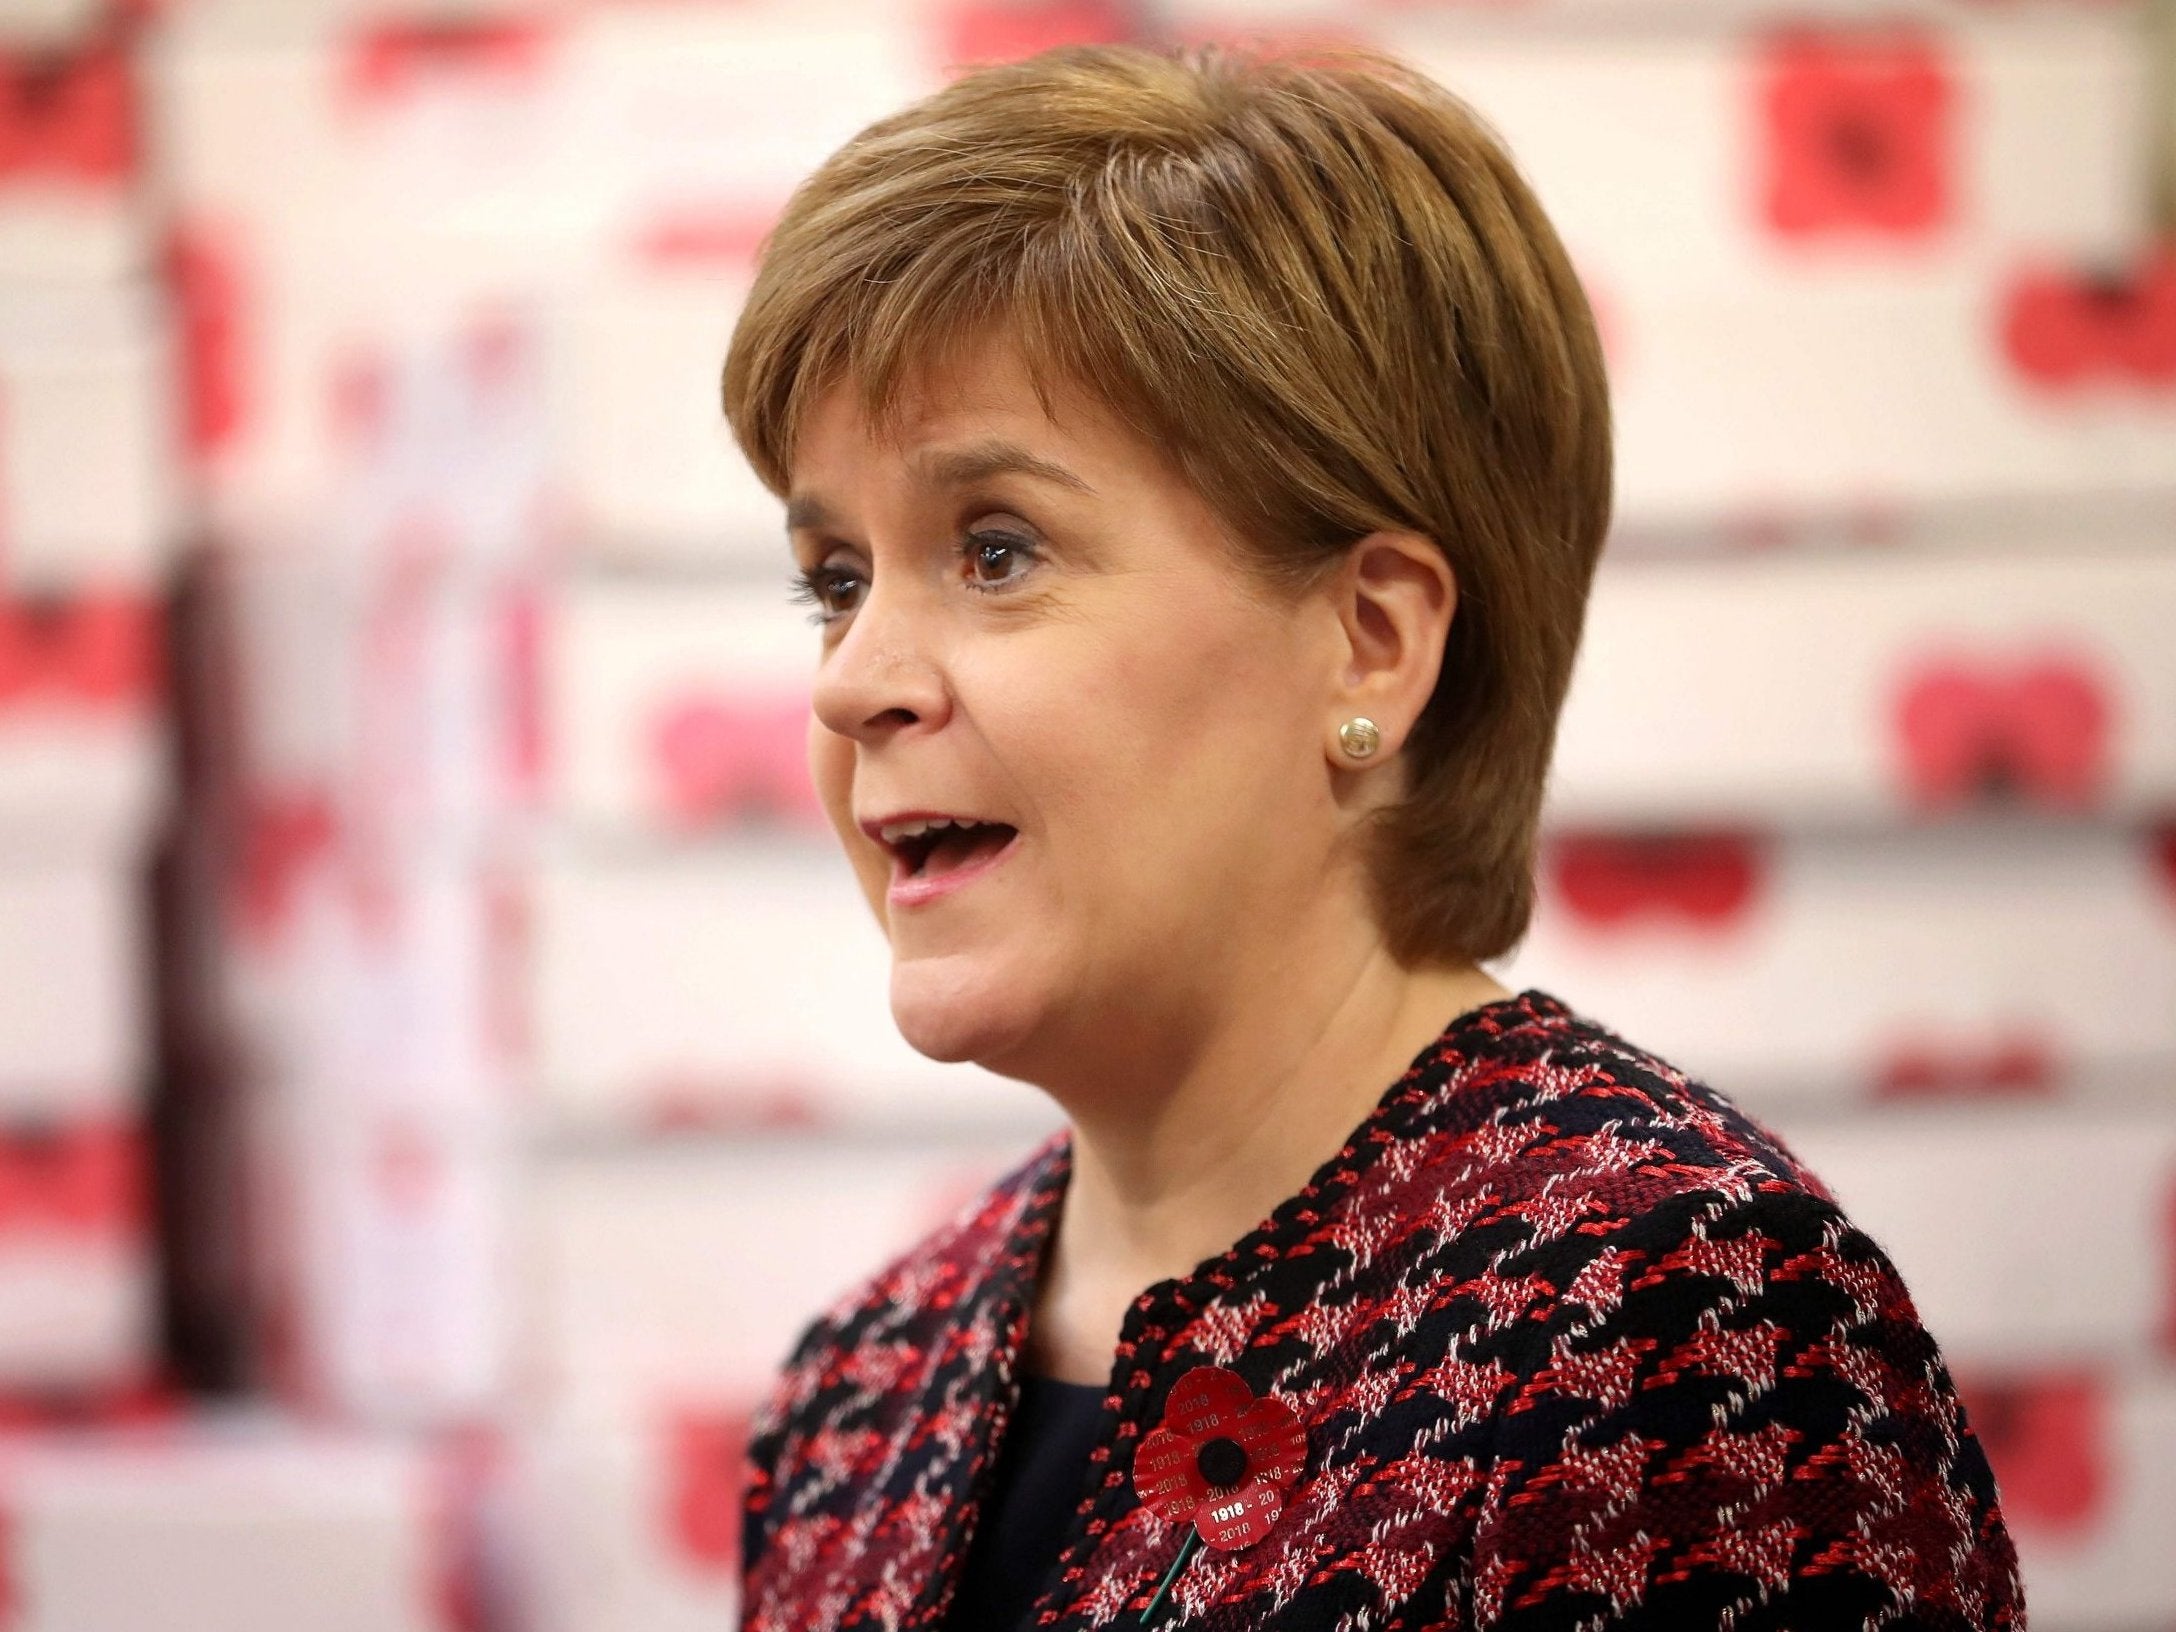 Nicola Sturgeon said she was willing to work with the 'softer Remain element of the Conservatives' to oppose Theresa May's Brexit deal